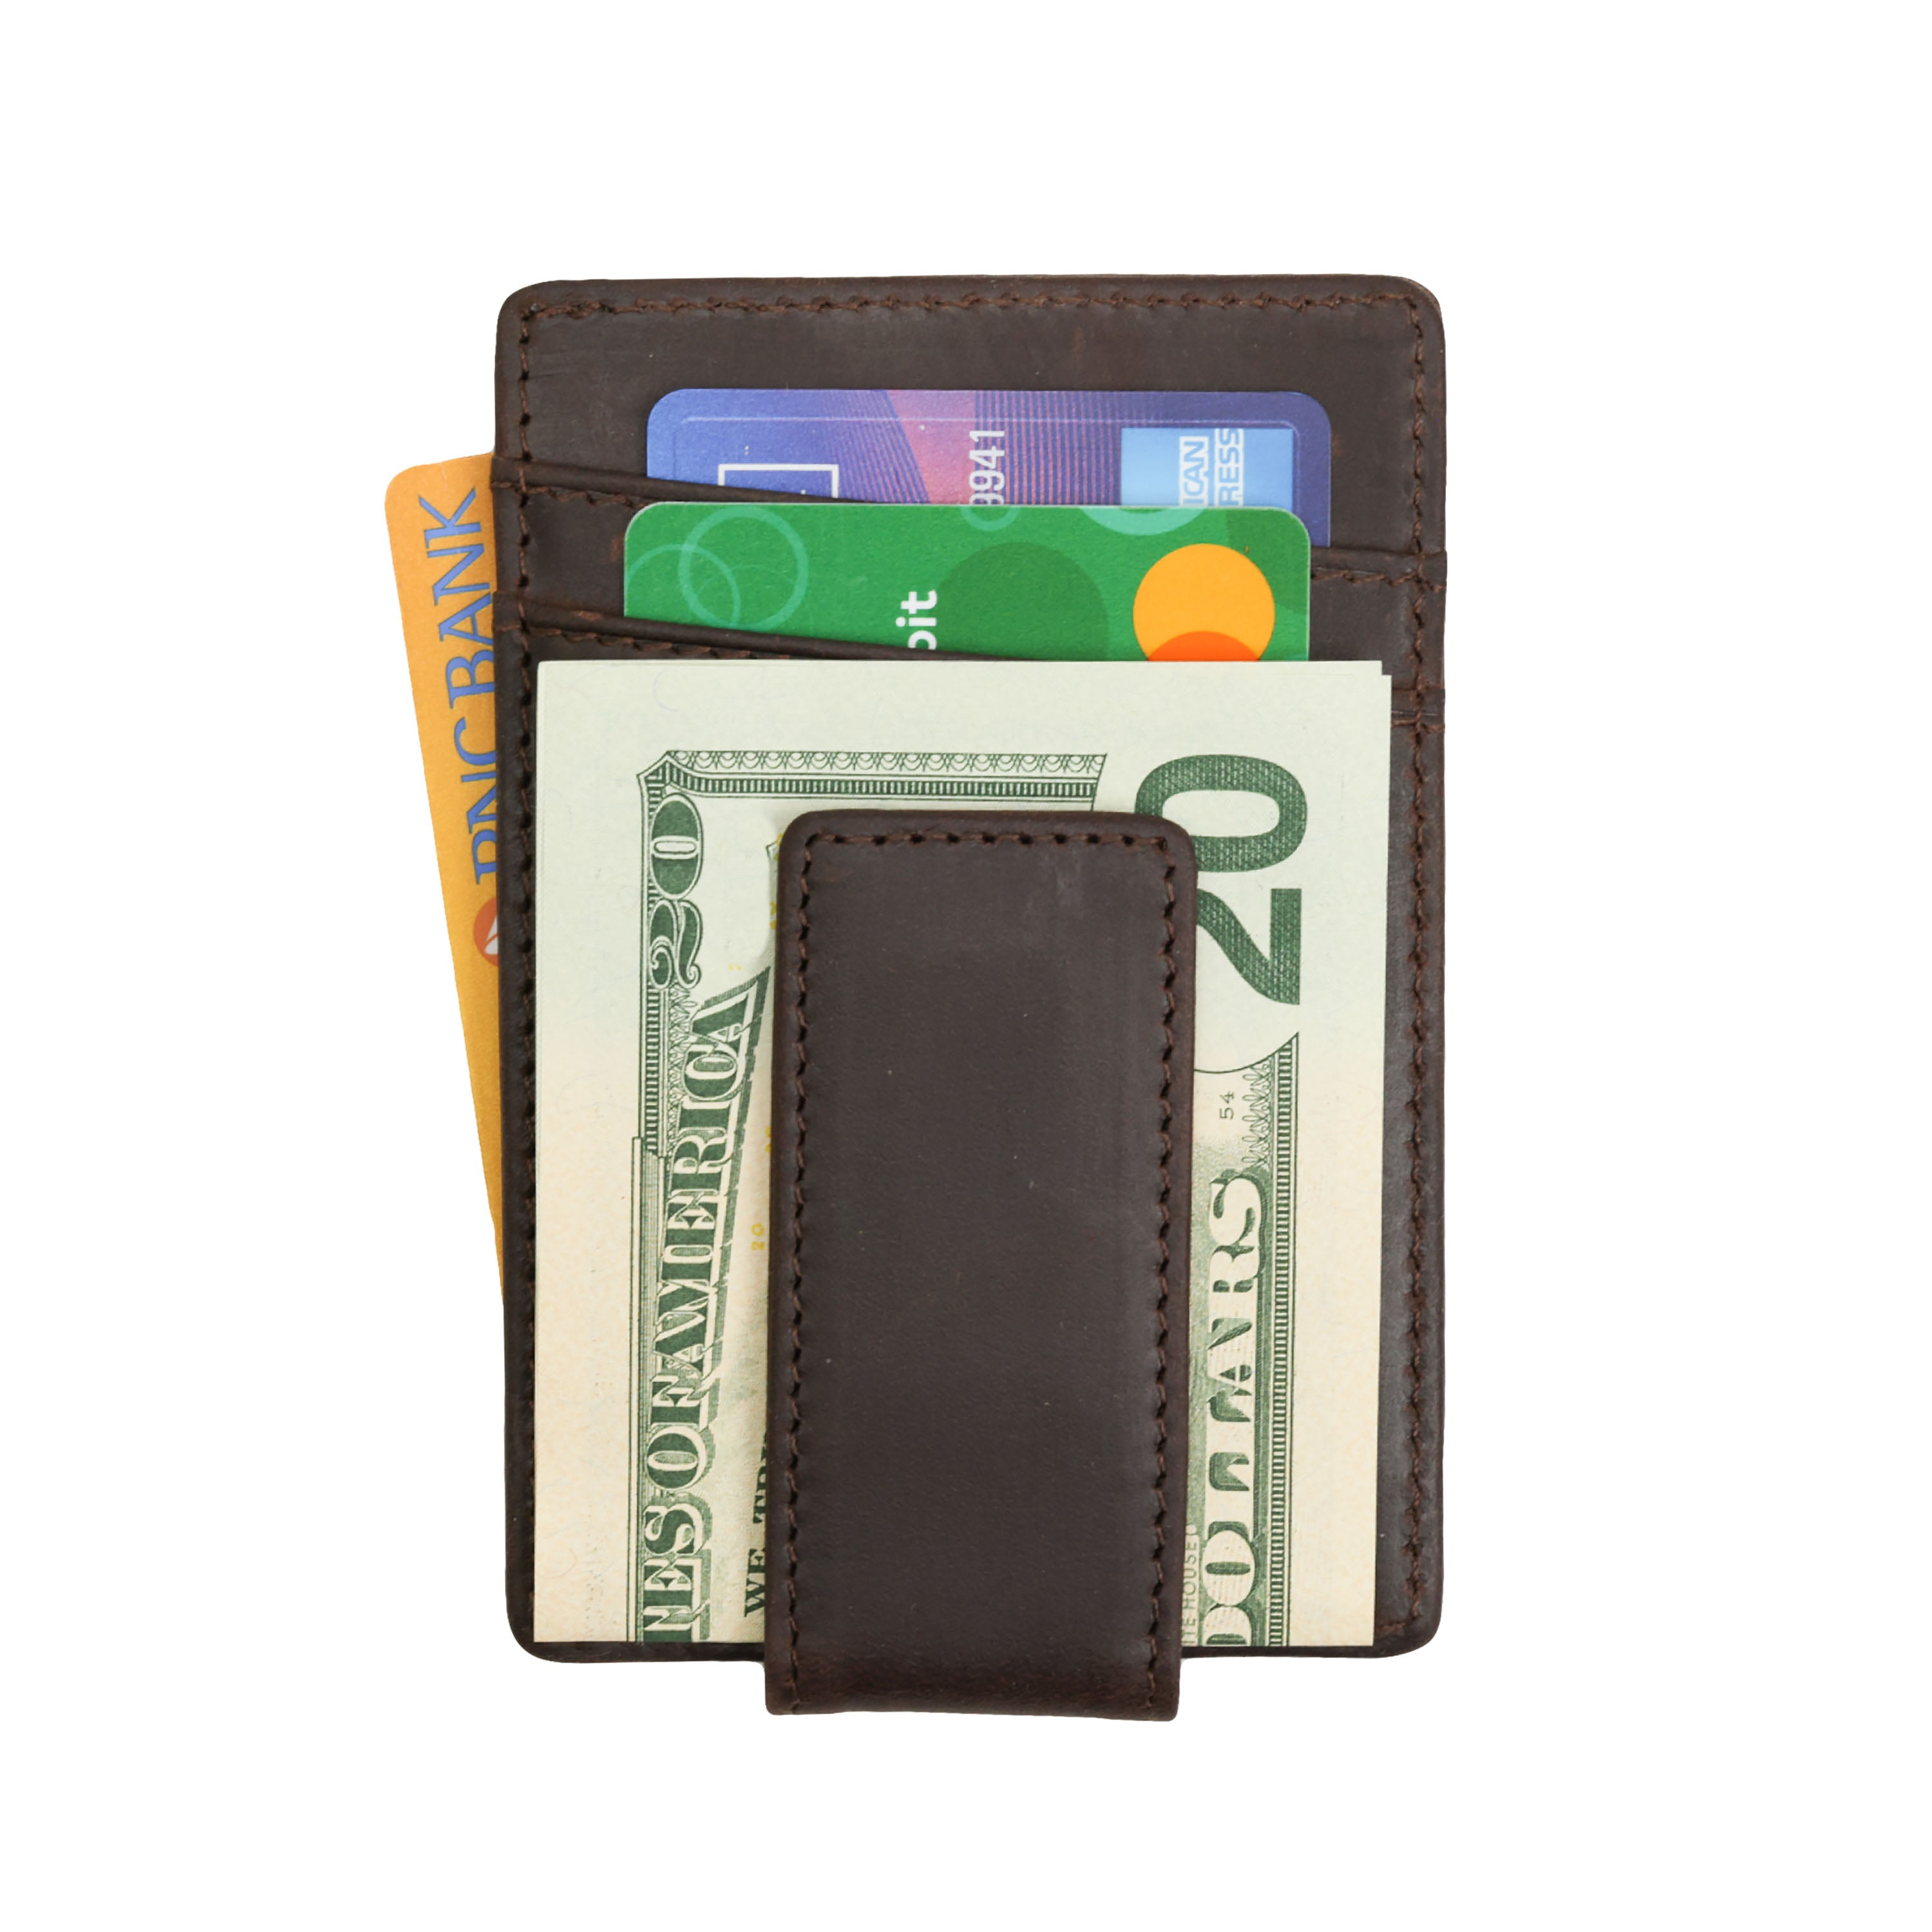 Genuine Leather Money Clip Wallet / Premium Quality Wallet by ThreeSixty Leather